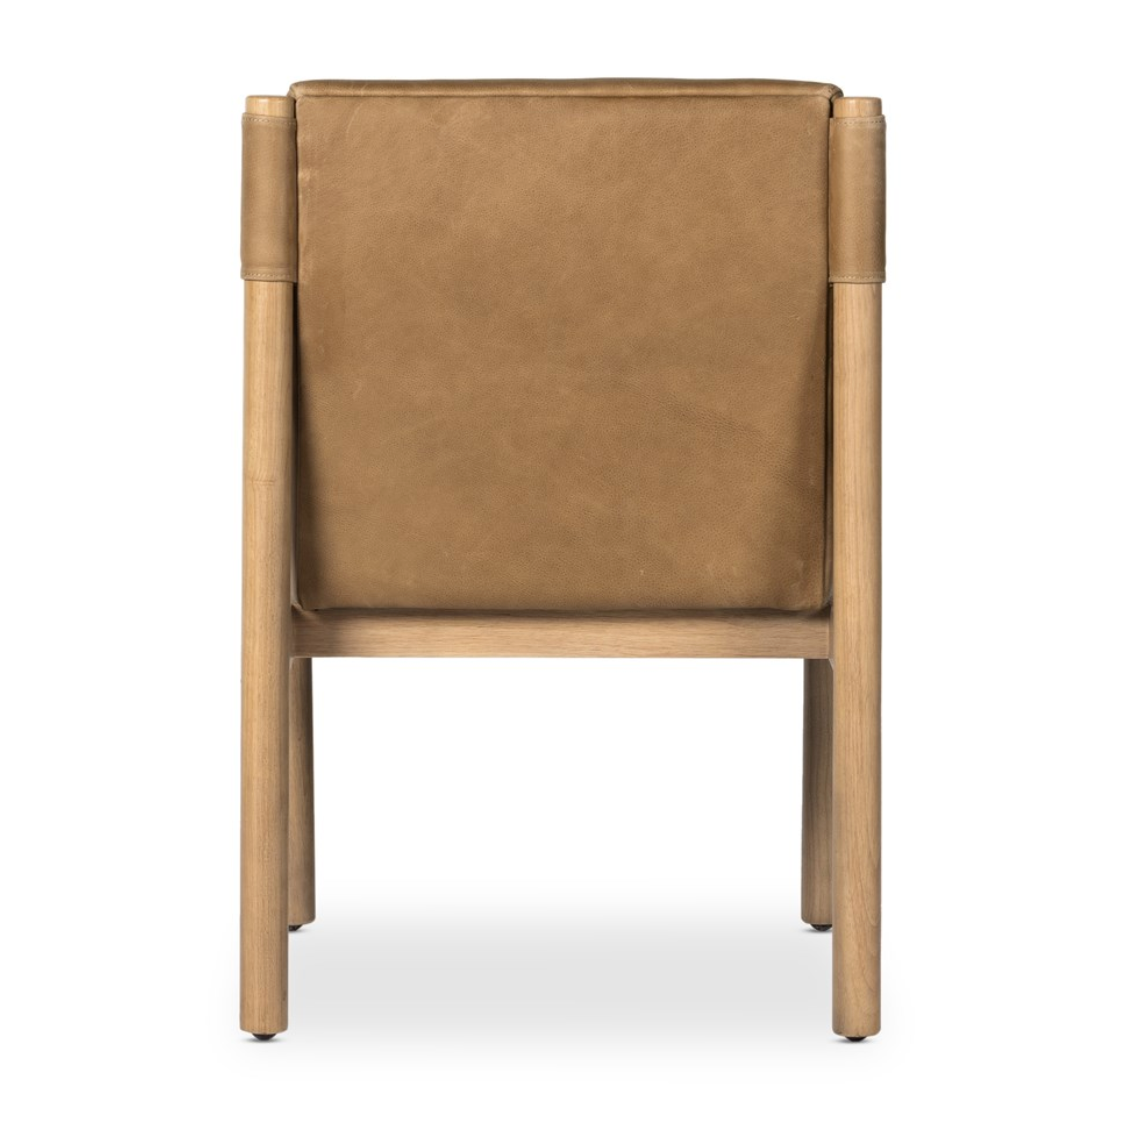 Kiano Palermo Top Grain Leather Dining Chair